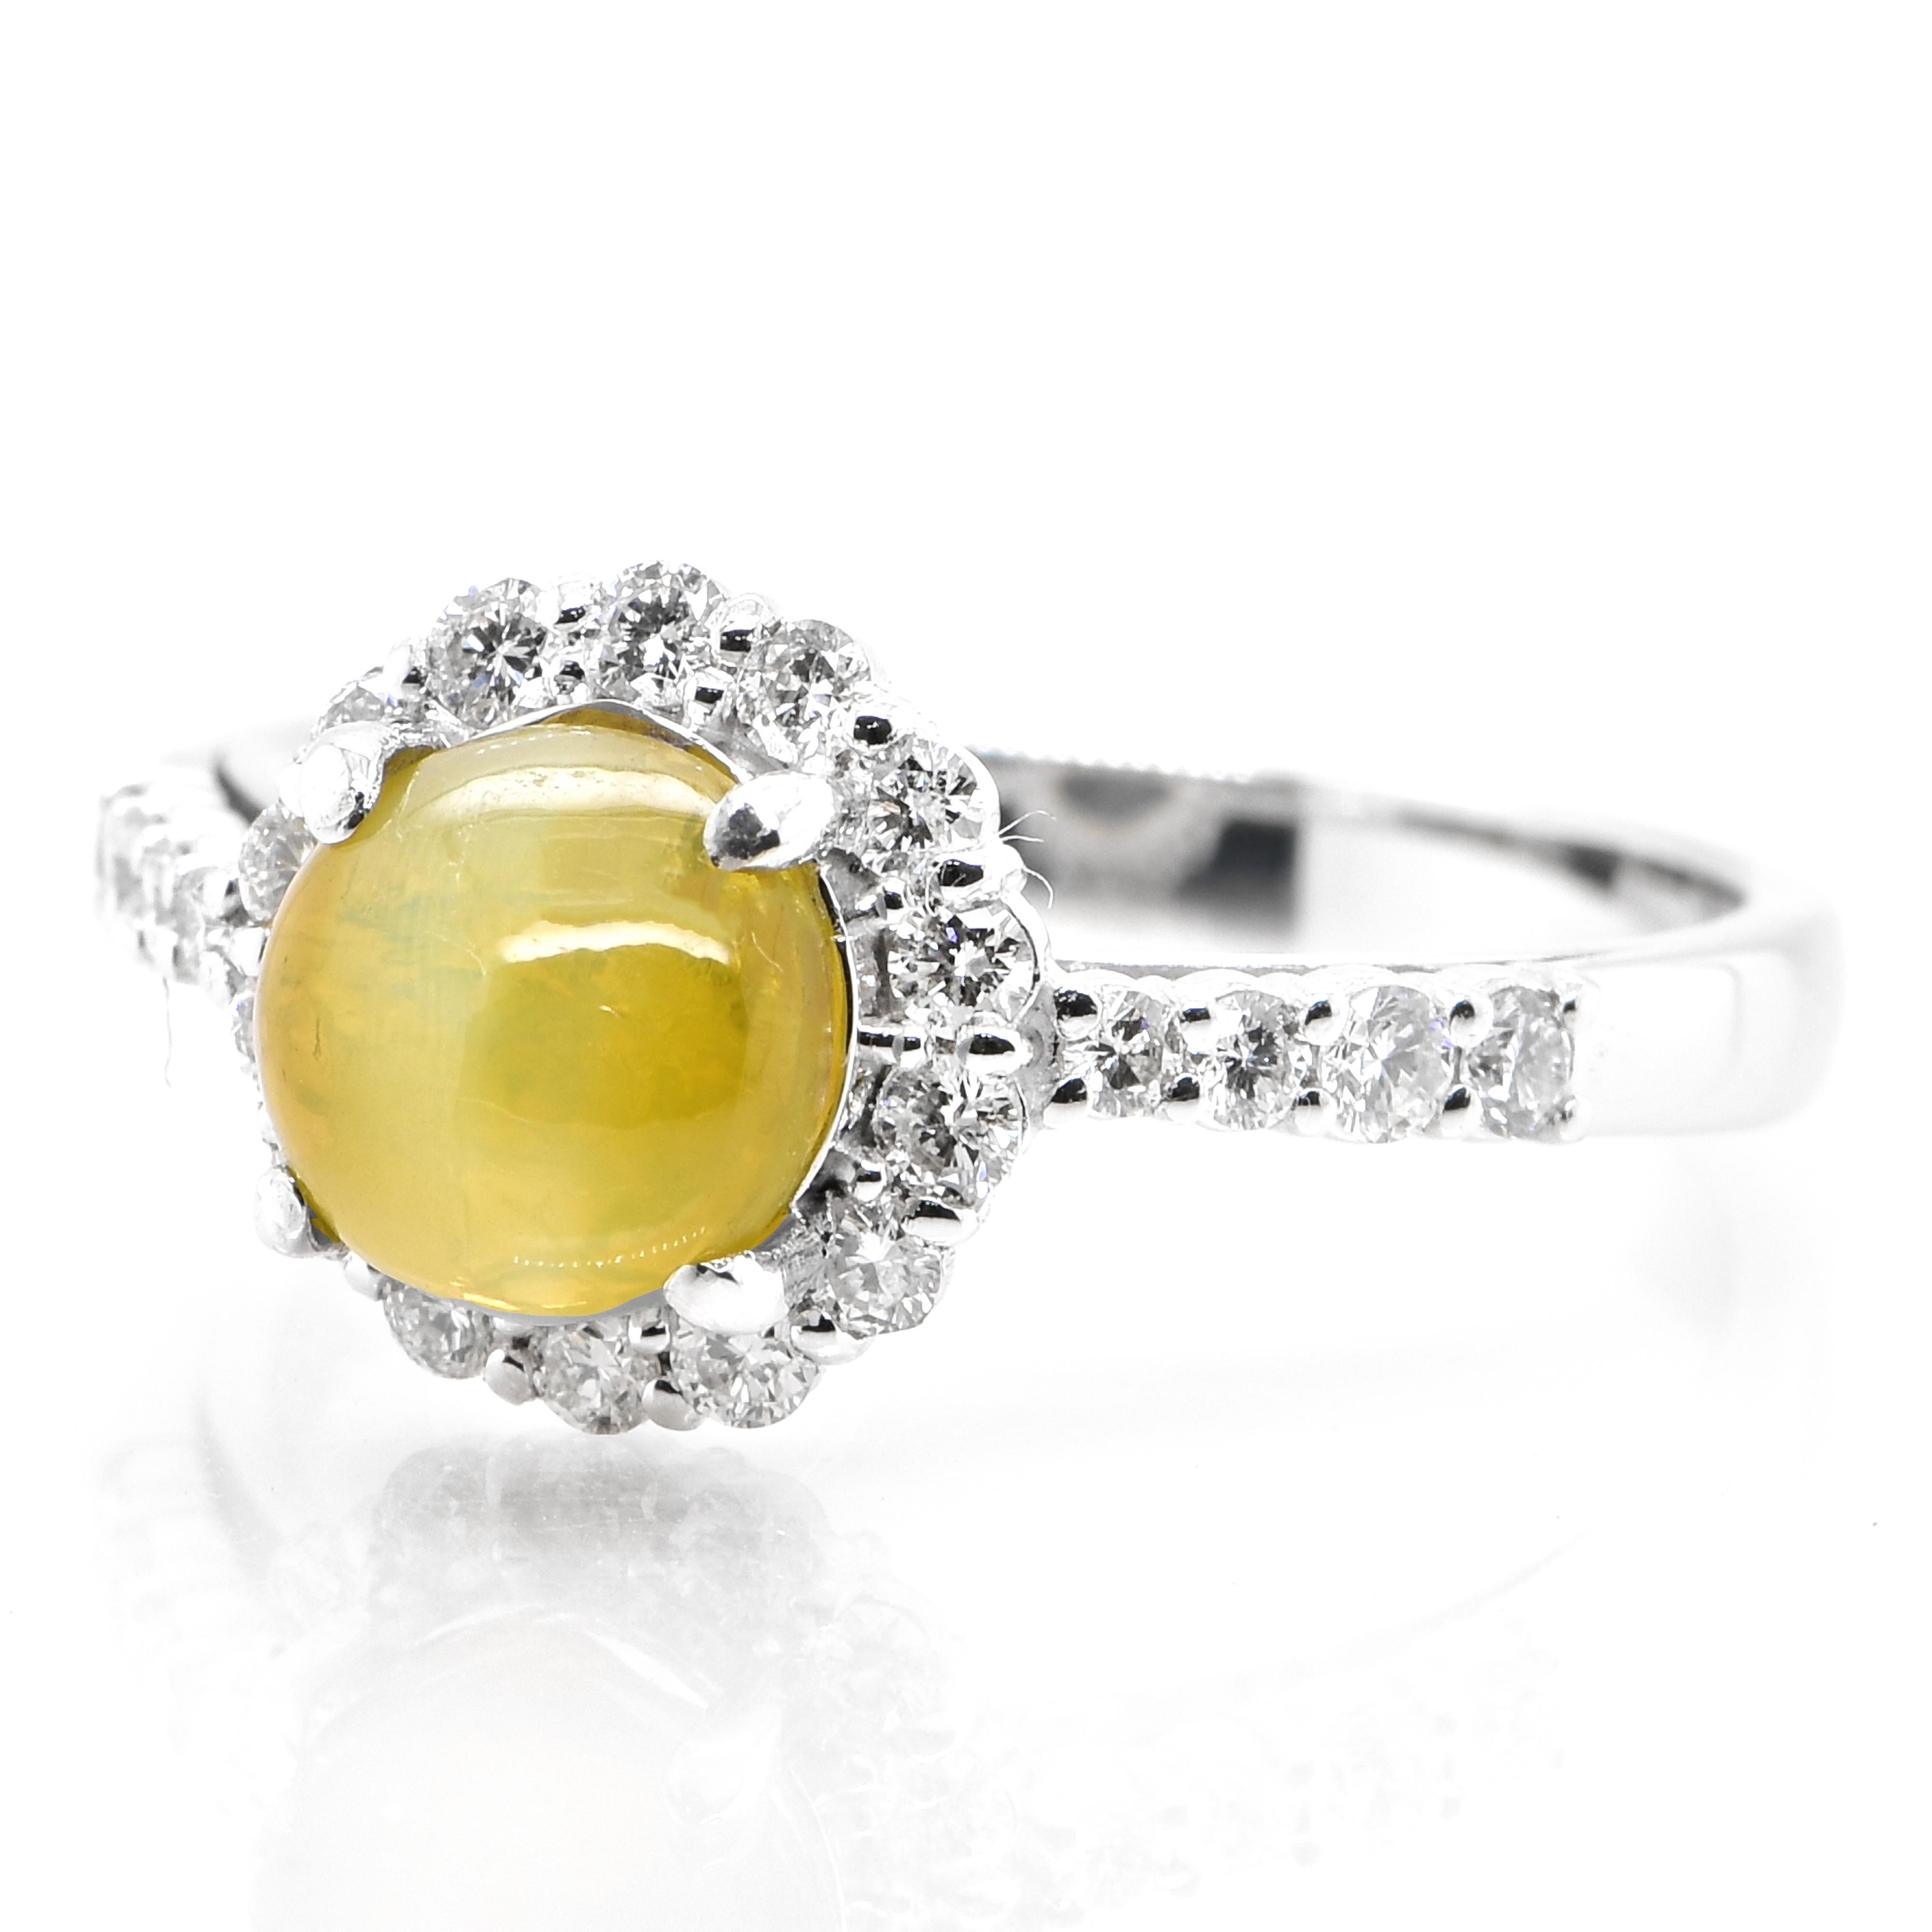 A stunning Ring featuring a 2.29 Carat Natural Cat's Eye Chrysoberyl and 0.41 Carats Diamond Accents set in Platinum. Cat's Eye Chrysoberyl exhibit a unique, naturally occurring phenomena called Chatoyancy or 